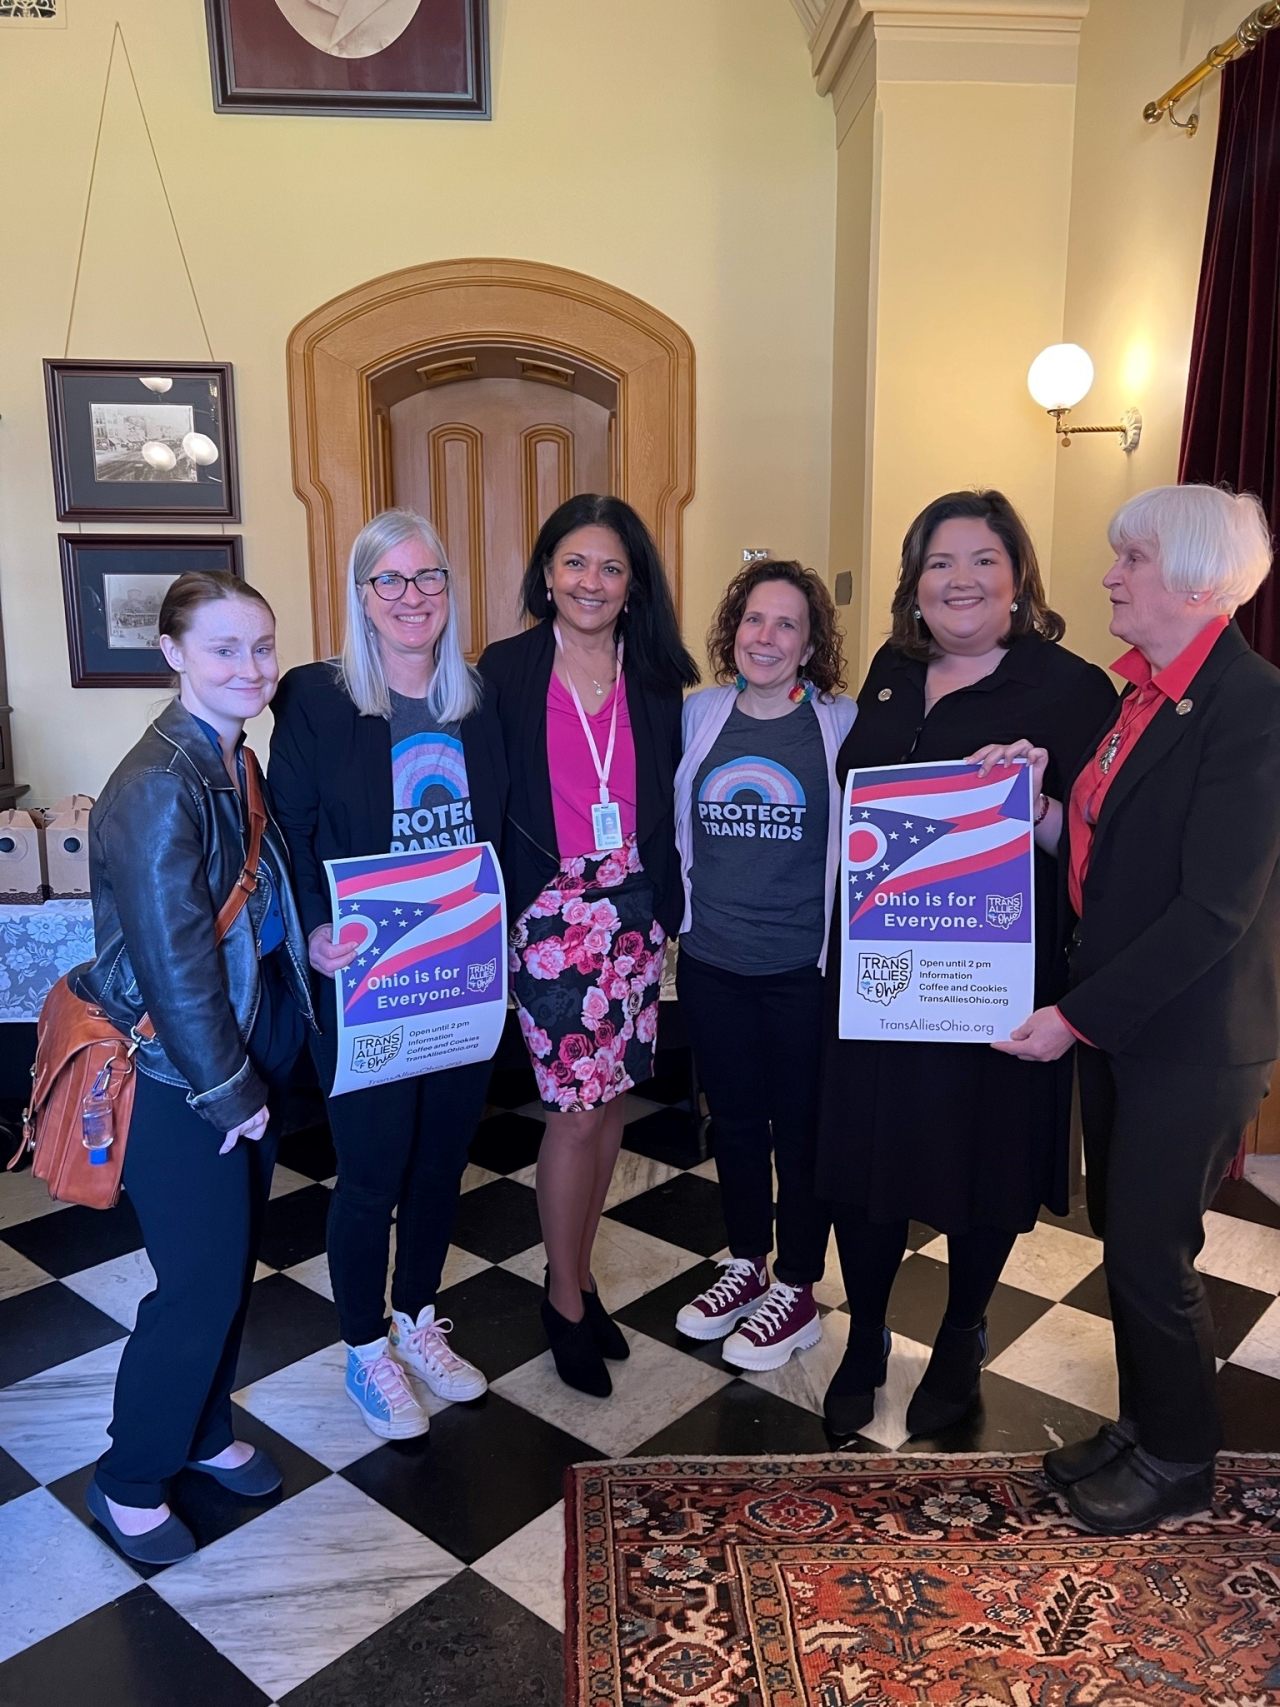 Rep. Somani attends an event at the Statehouse with Trans Allies Ohio, along with Representatives Miranda and Lightbody